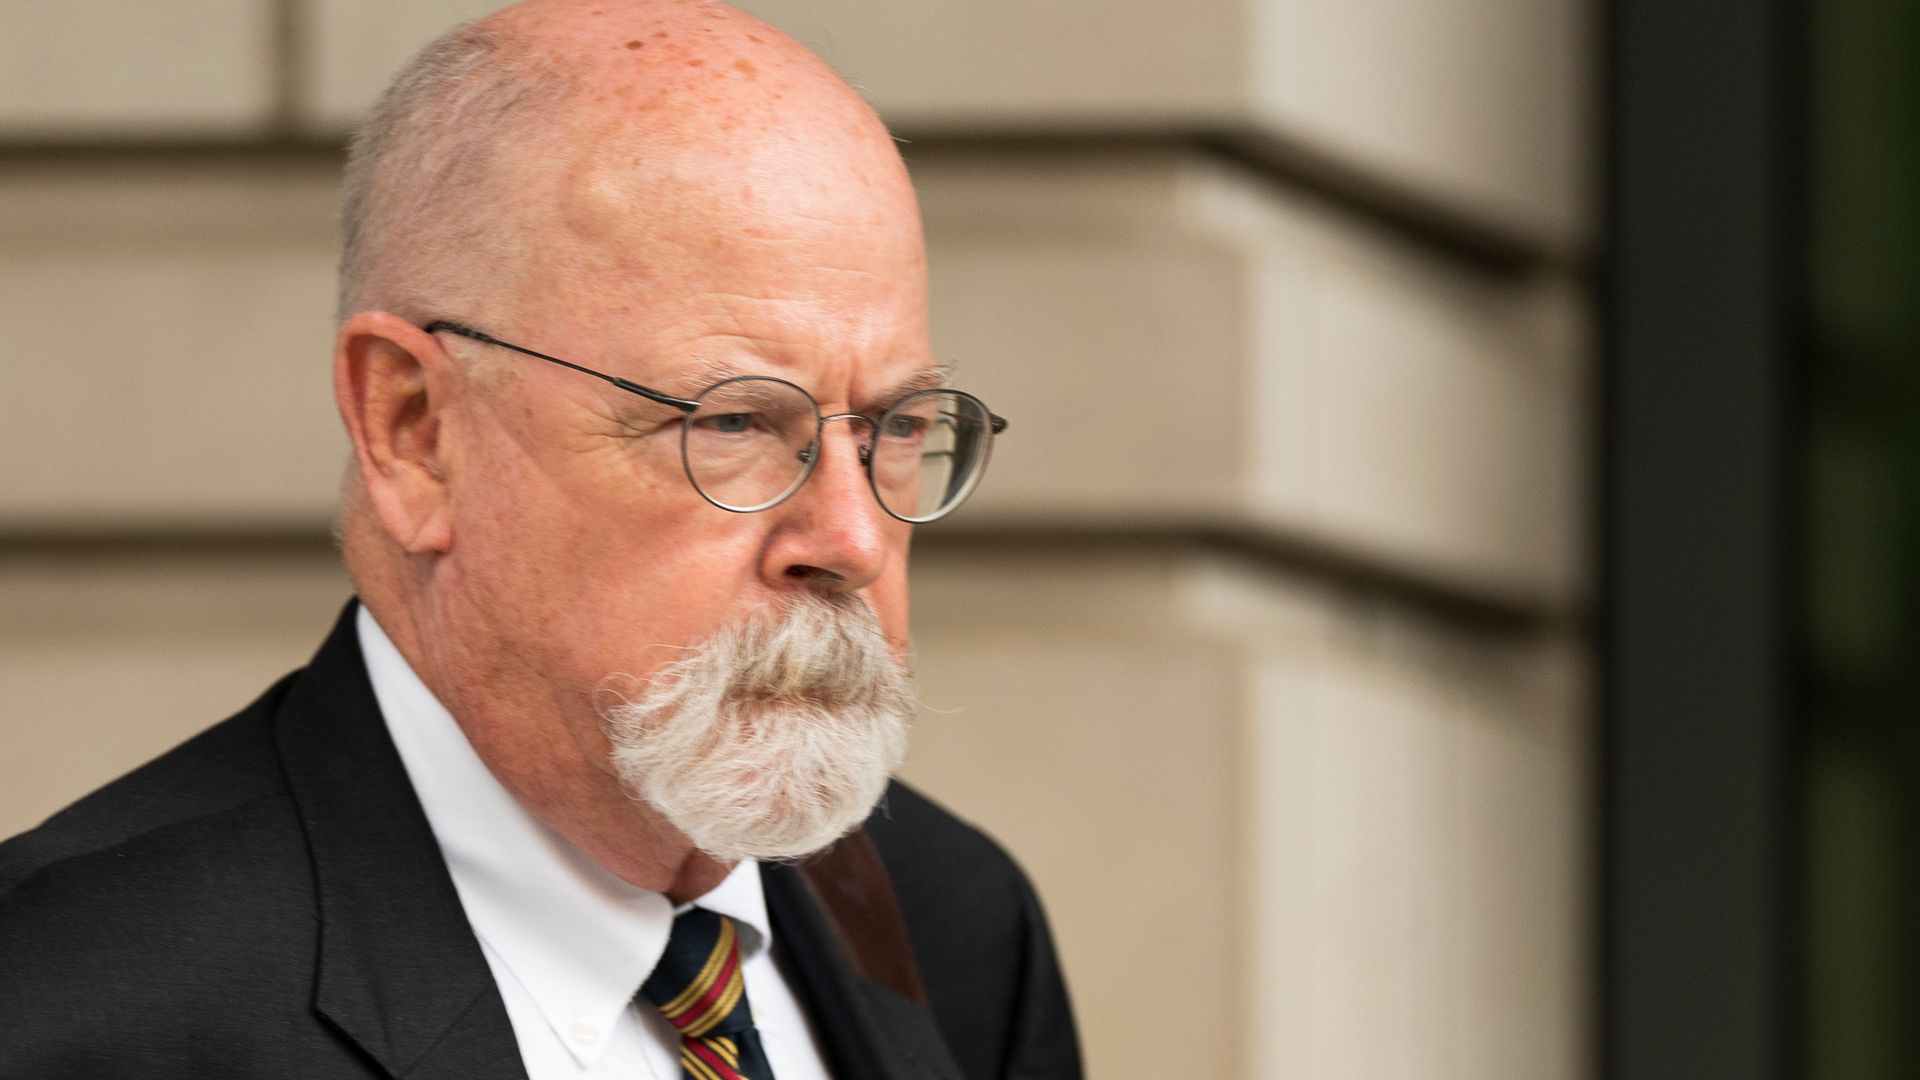 A report by special counsel John Durham says the FBI didn't have the evidence to pursue an investigation into US-Russia collusion in 2016.